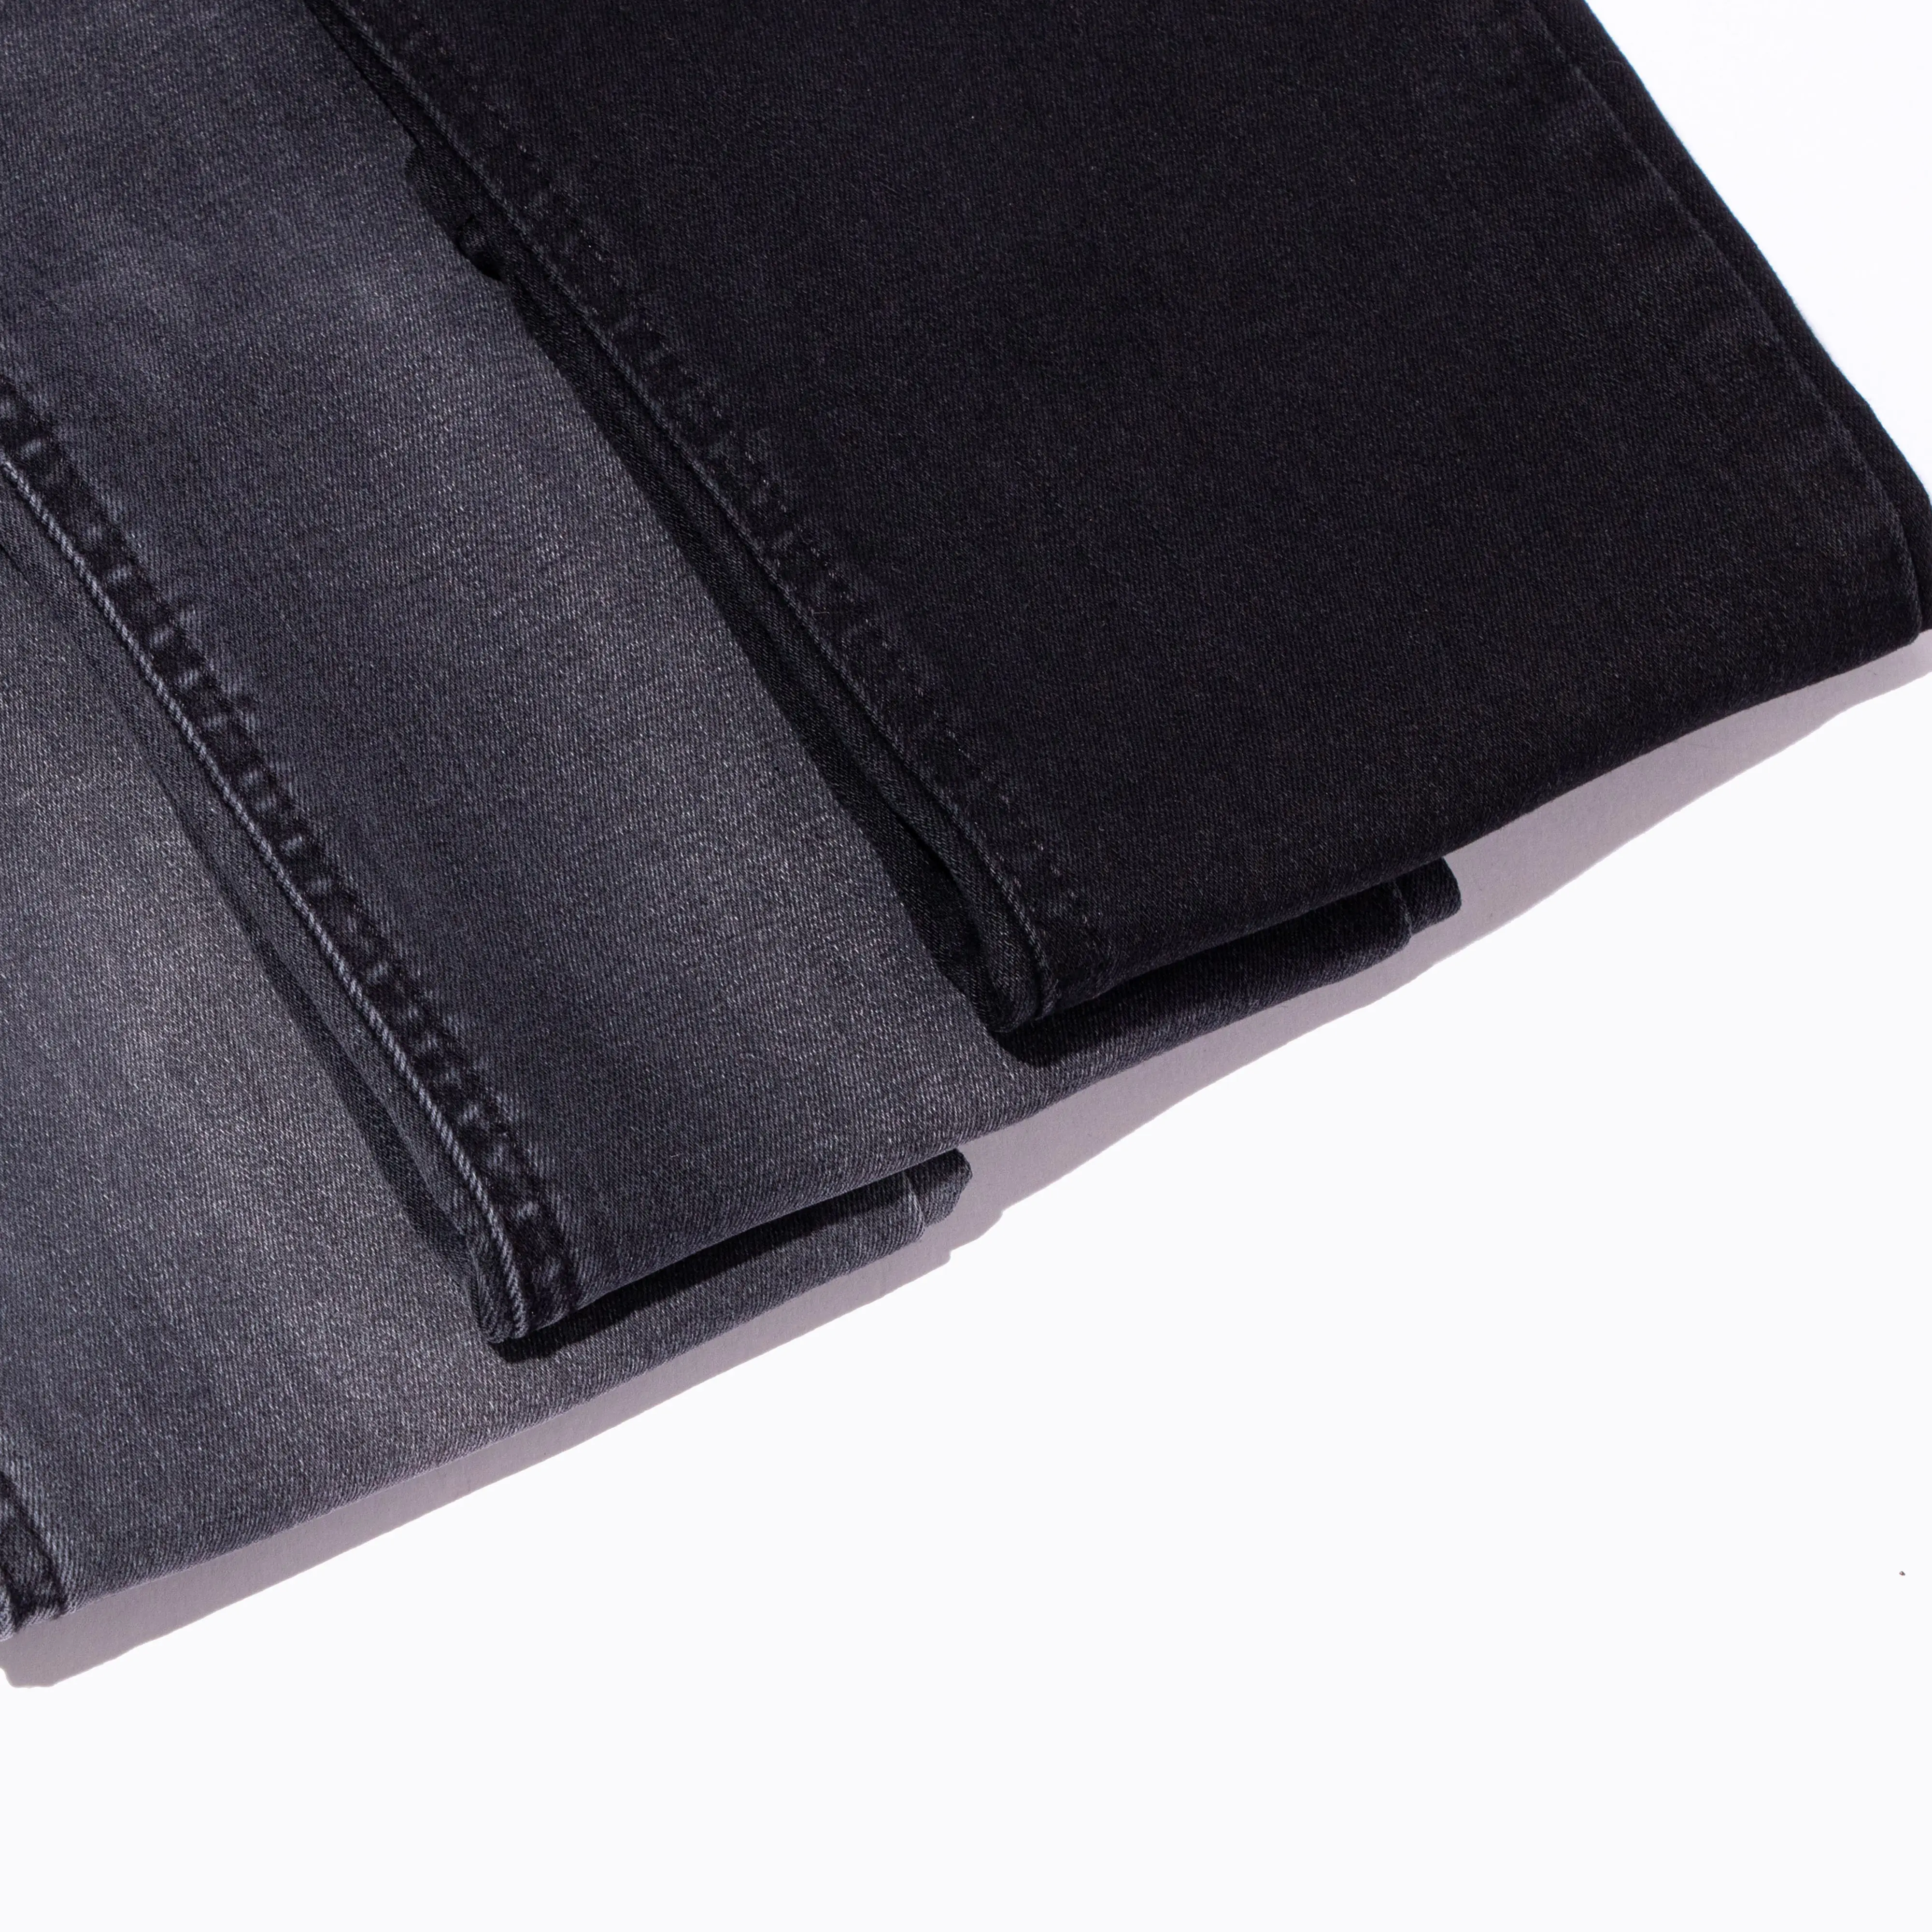 High quality mercerized black 66% cotton 28% polyester 1 3 right hand twill jeans fabric